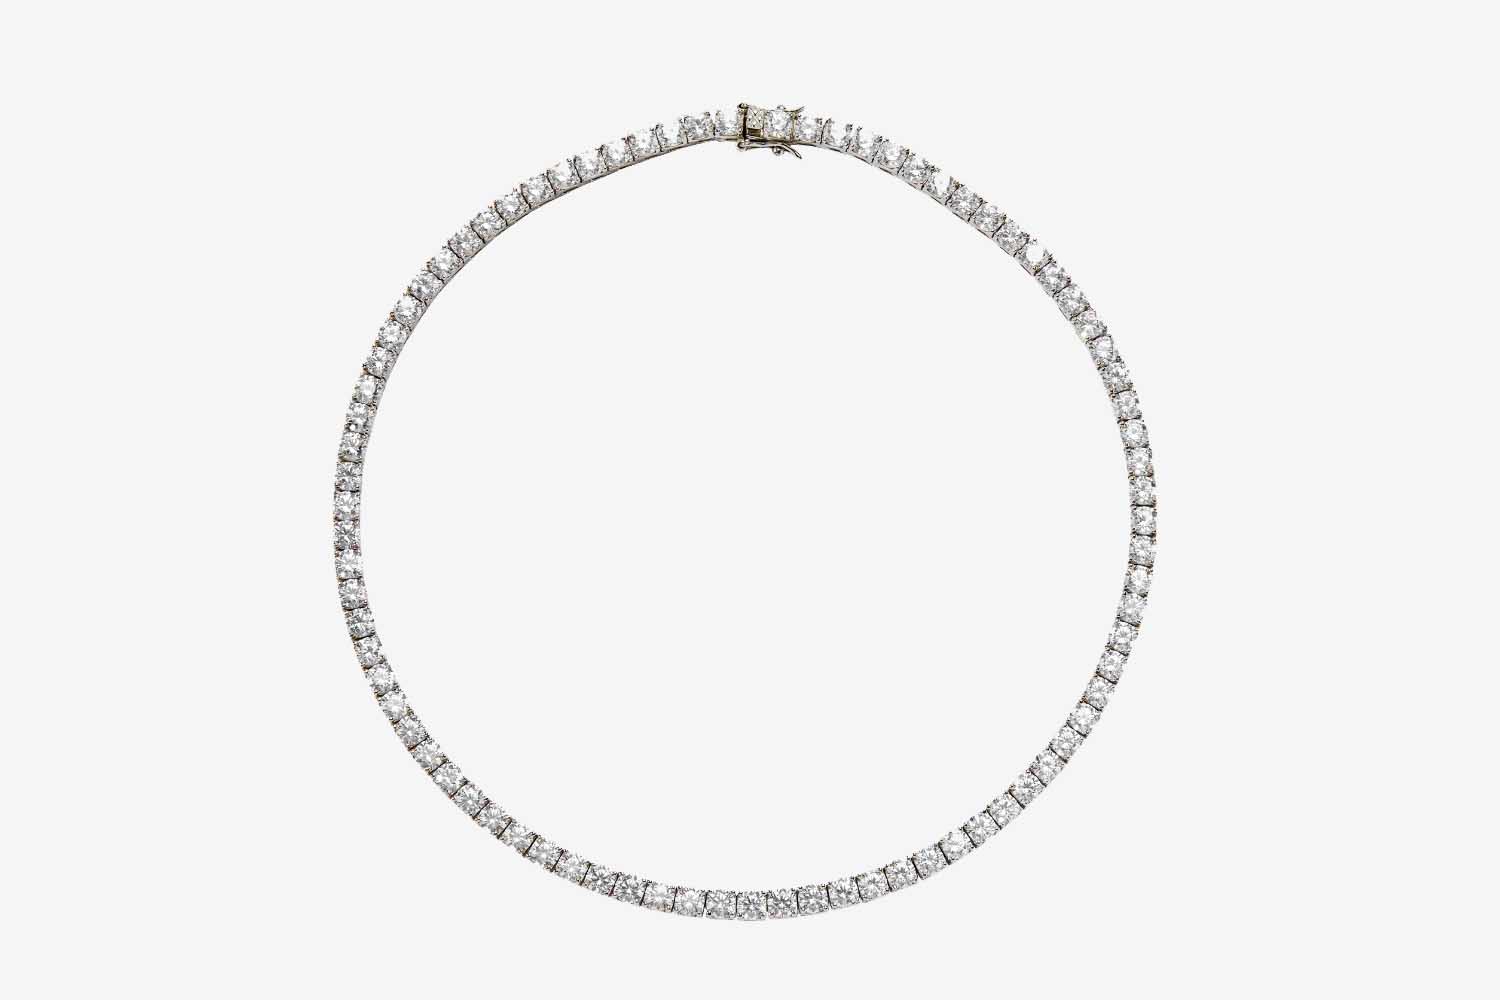 Dorsey Kate 4.5MM Round Cut Silver Riviere Necklace